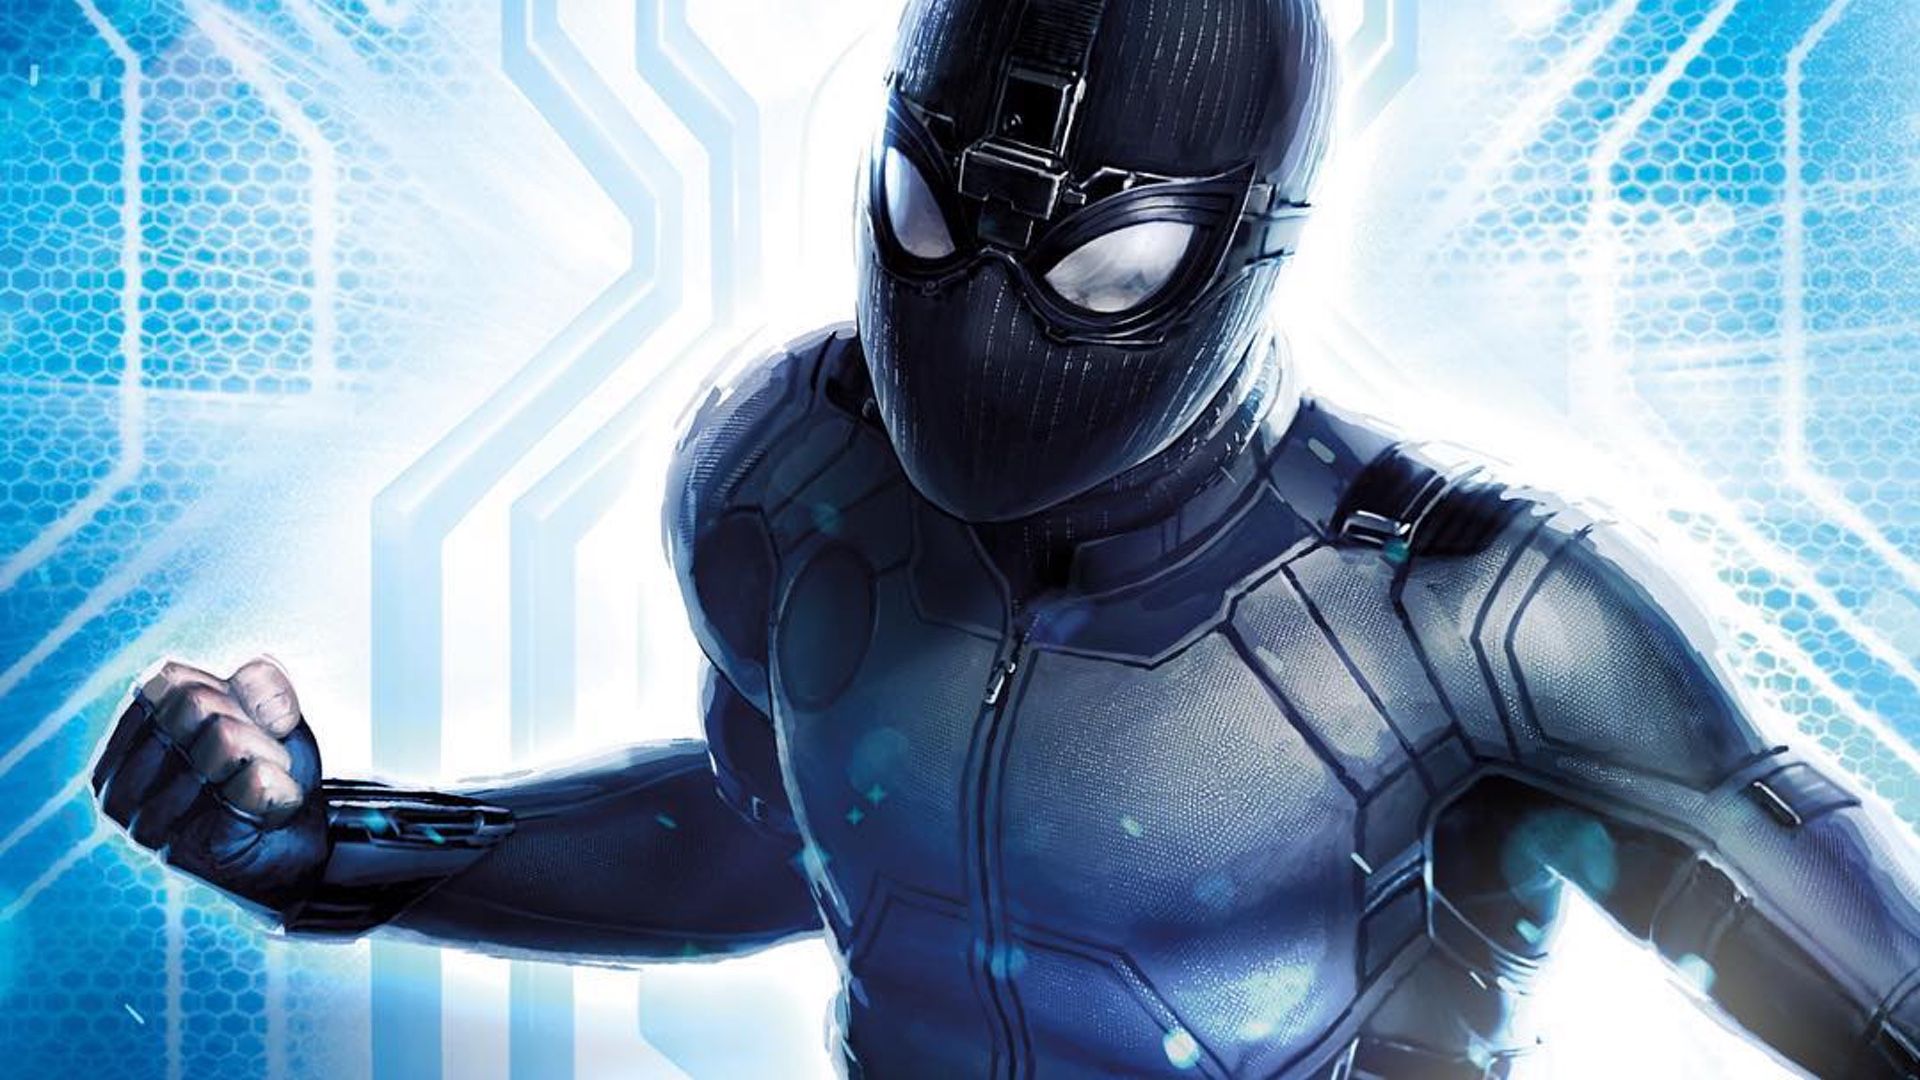 New Promo Art For SPIDER MAN: FAR FROM HOME Features Our Best Look Yet At Spidey's Black Suit